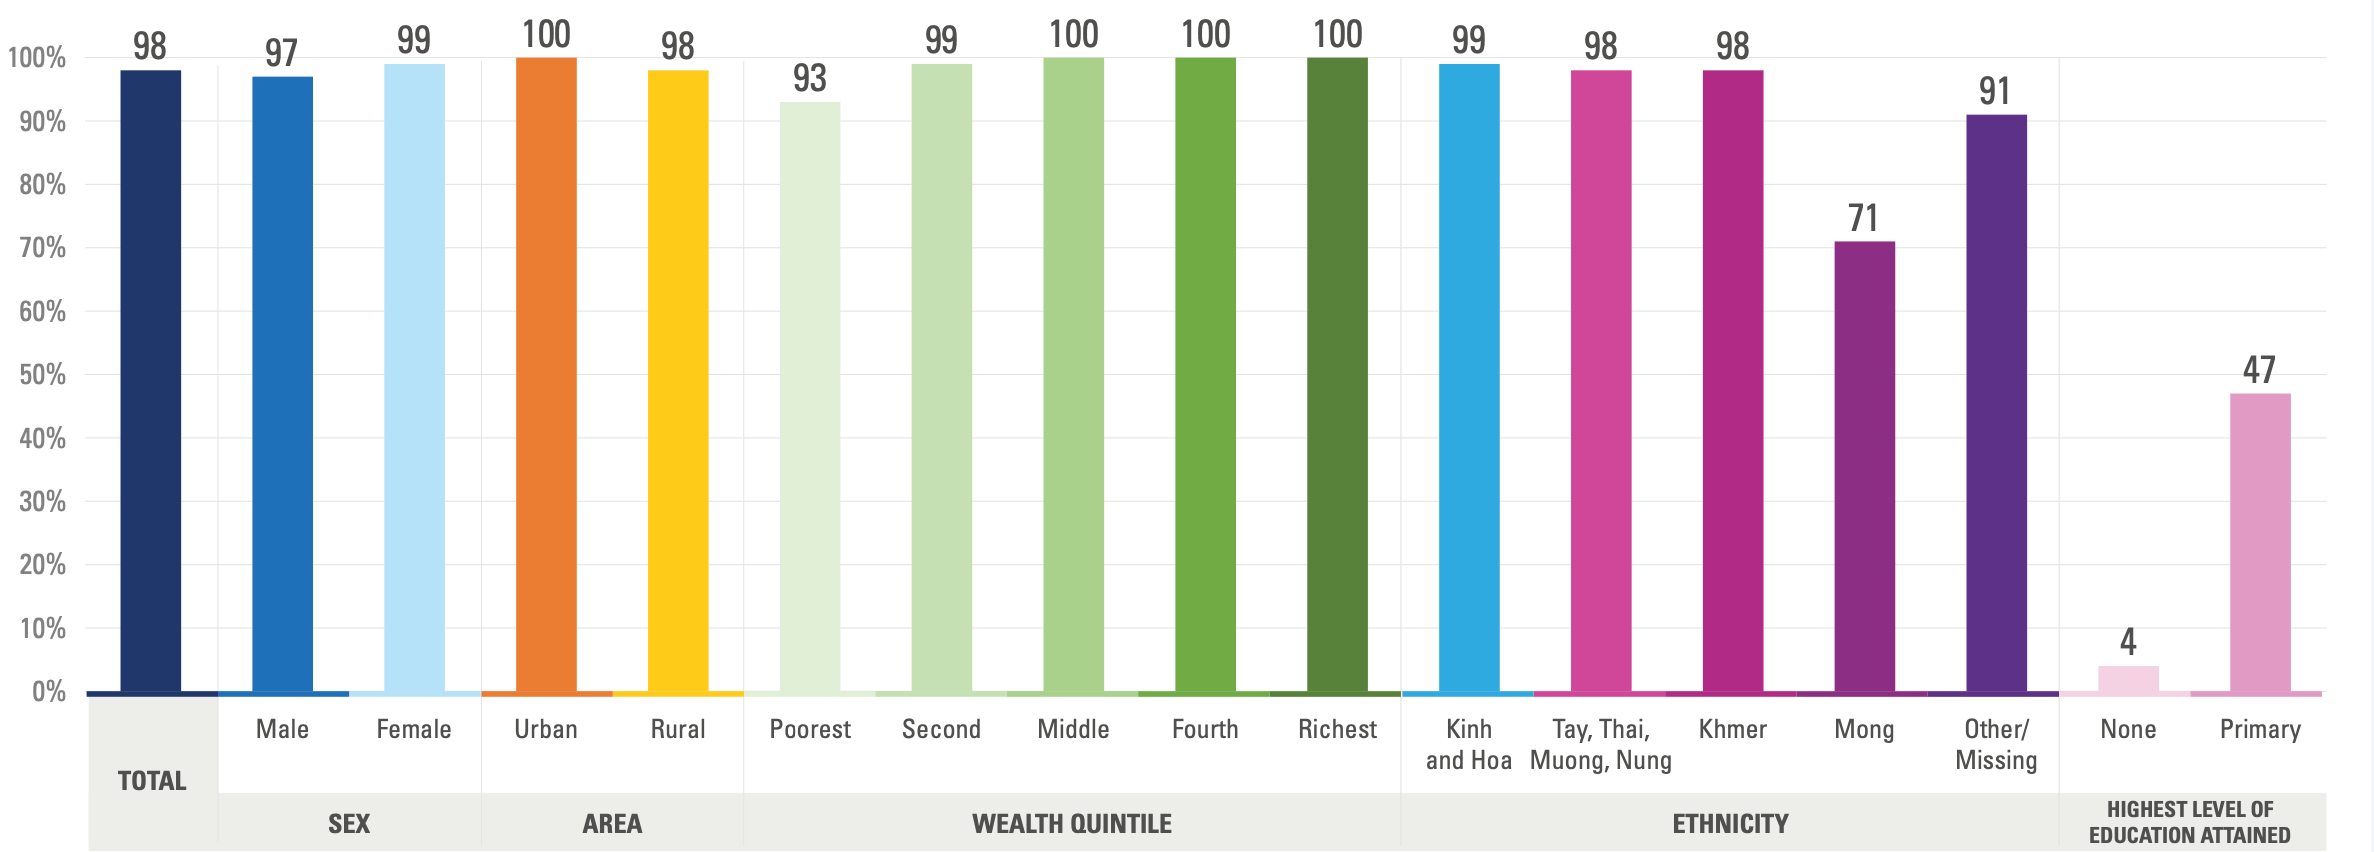 Bar chart representing the literacy rate of youths by gender, area, wealth, ethnicity, and education level.